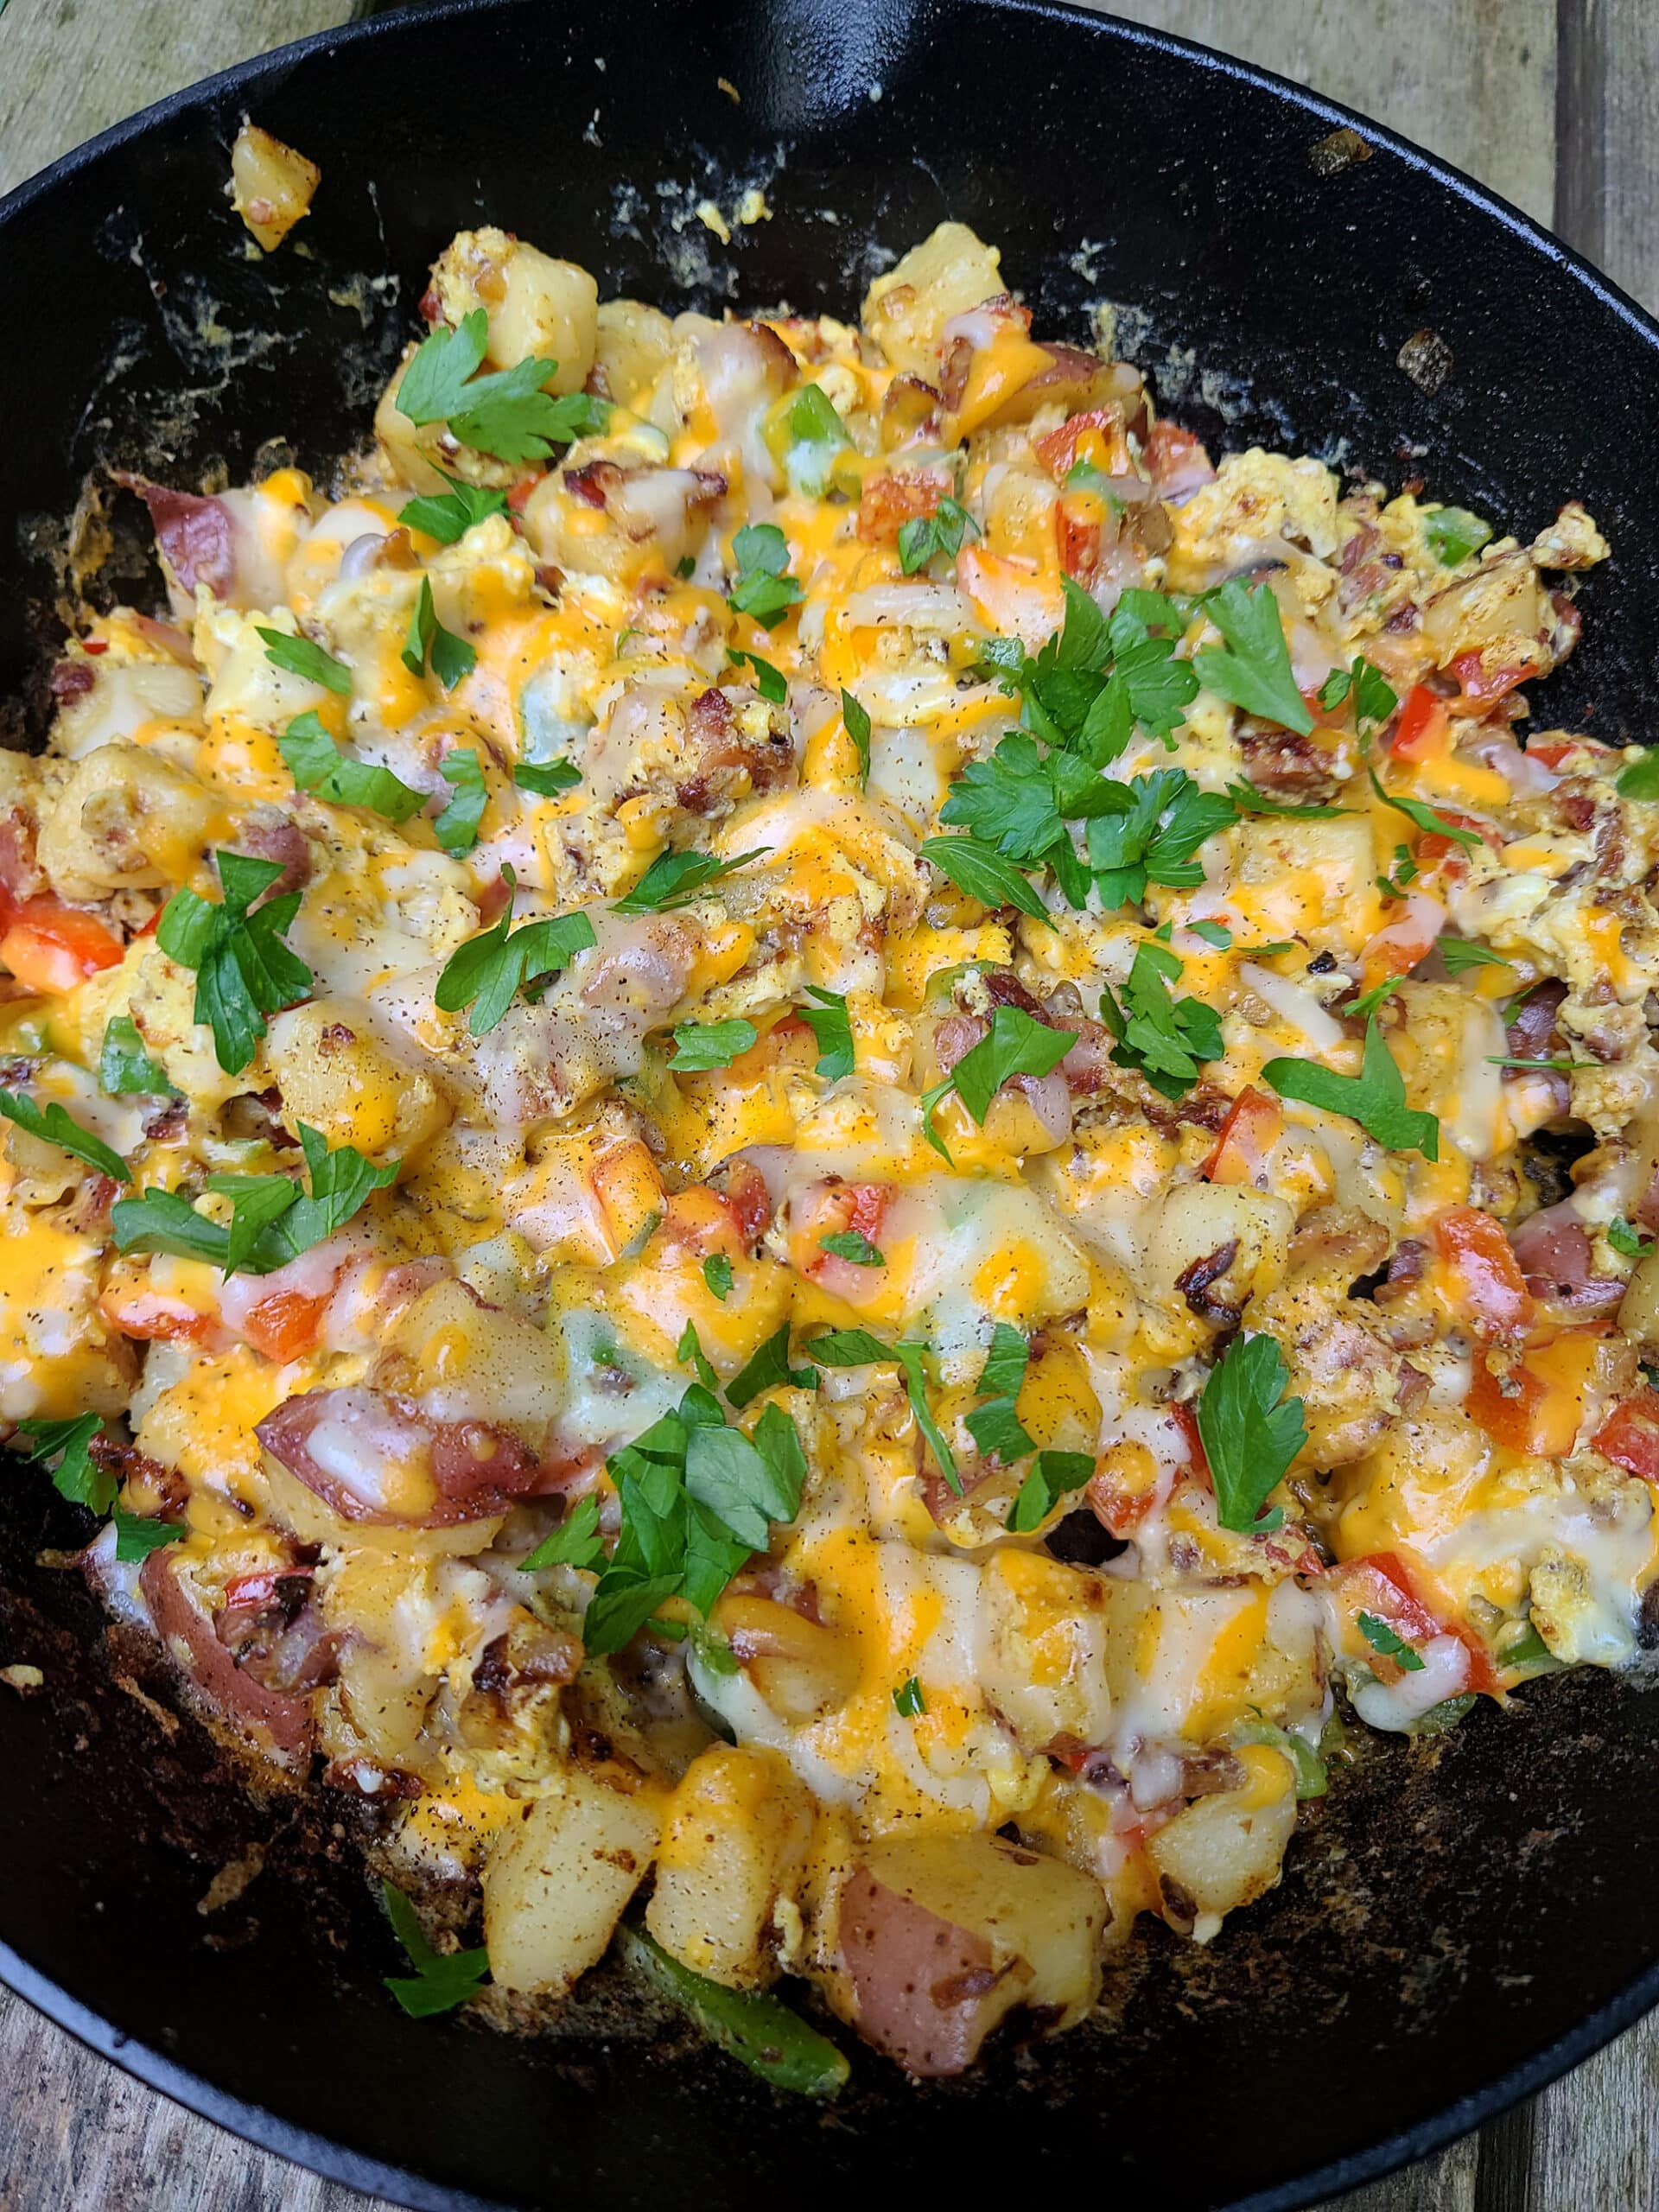 A breakfast skillet of potatoes, peppers, bacon, eggs, and cheese in a cast iron skillet, topped with parsley.